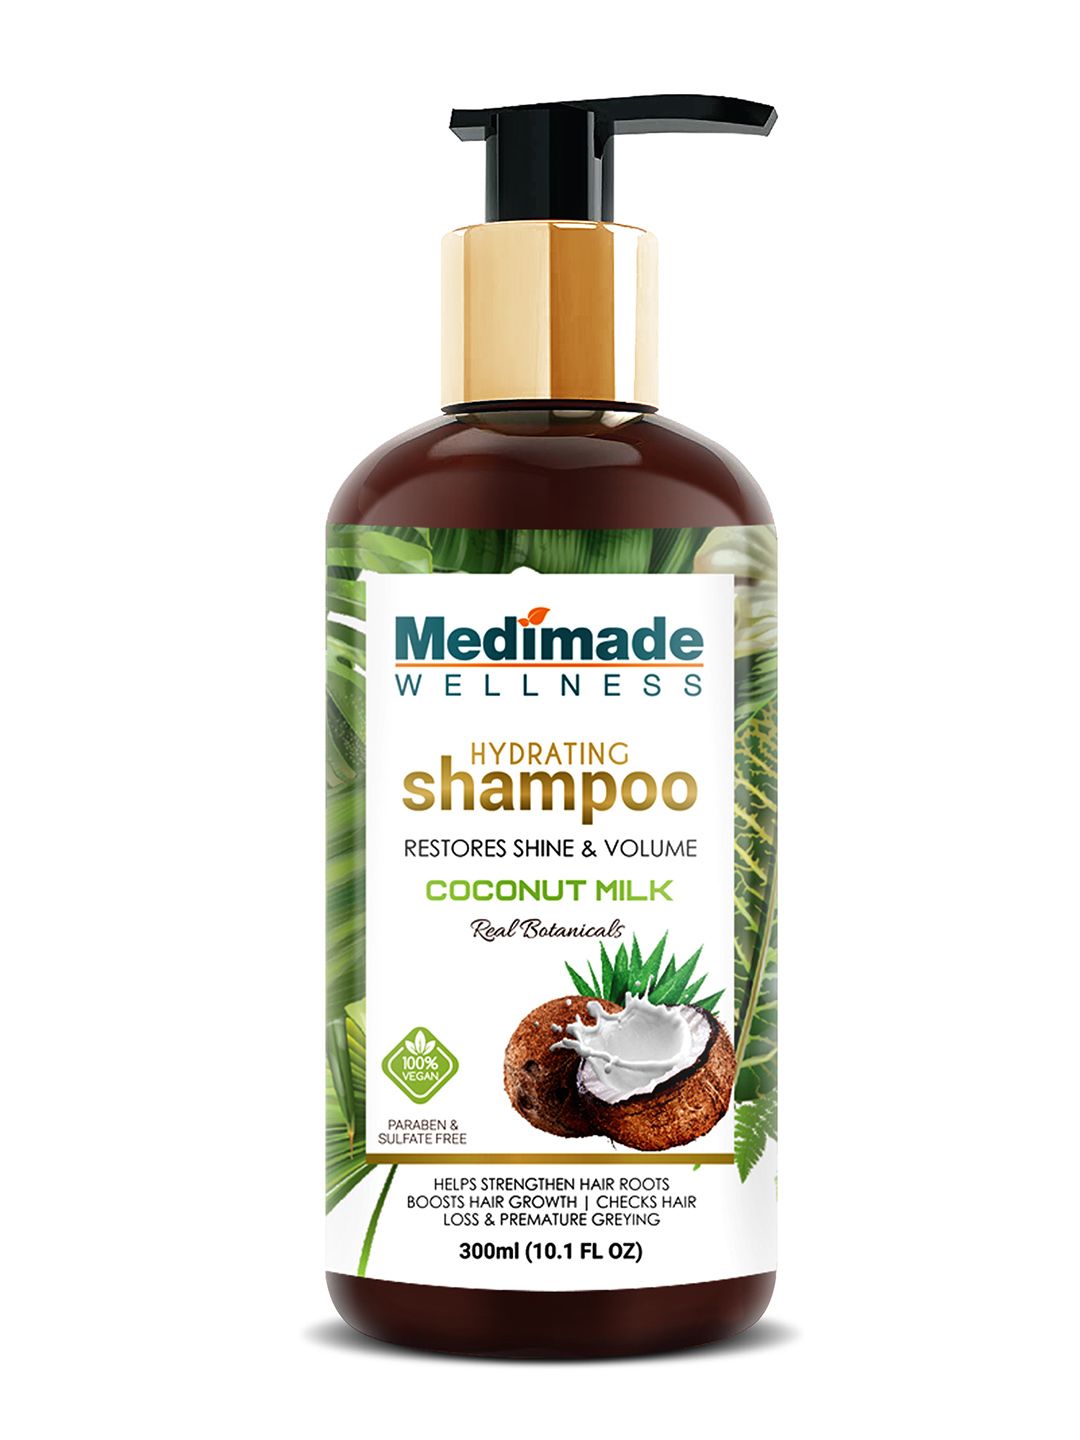 Medimade Hydrating Shampoo with Coconut Milk - 300 ml Price in India